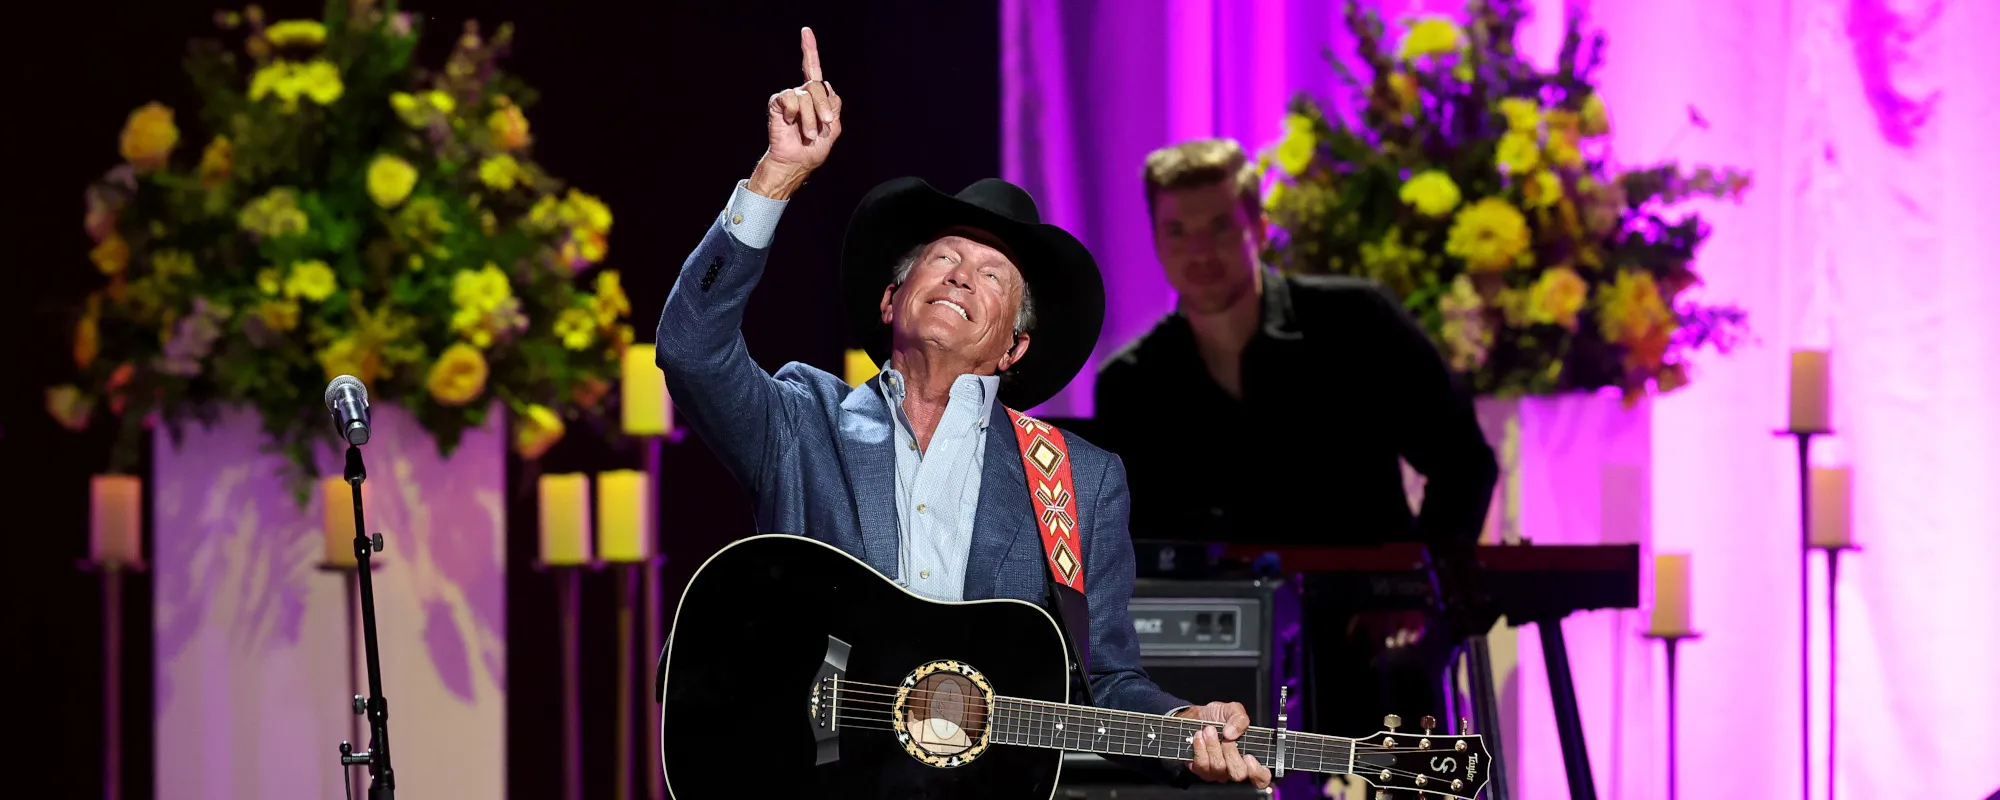 Meaning Behind George Strait’s “Troubadour”